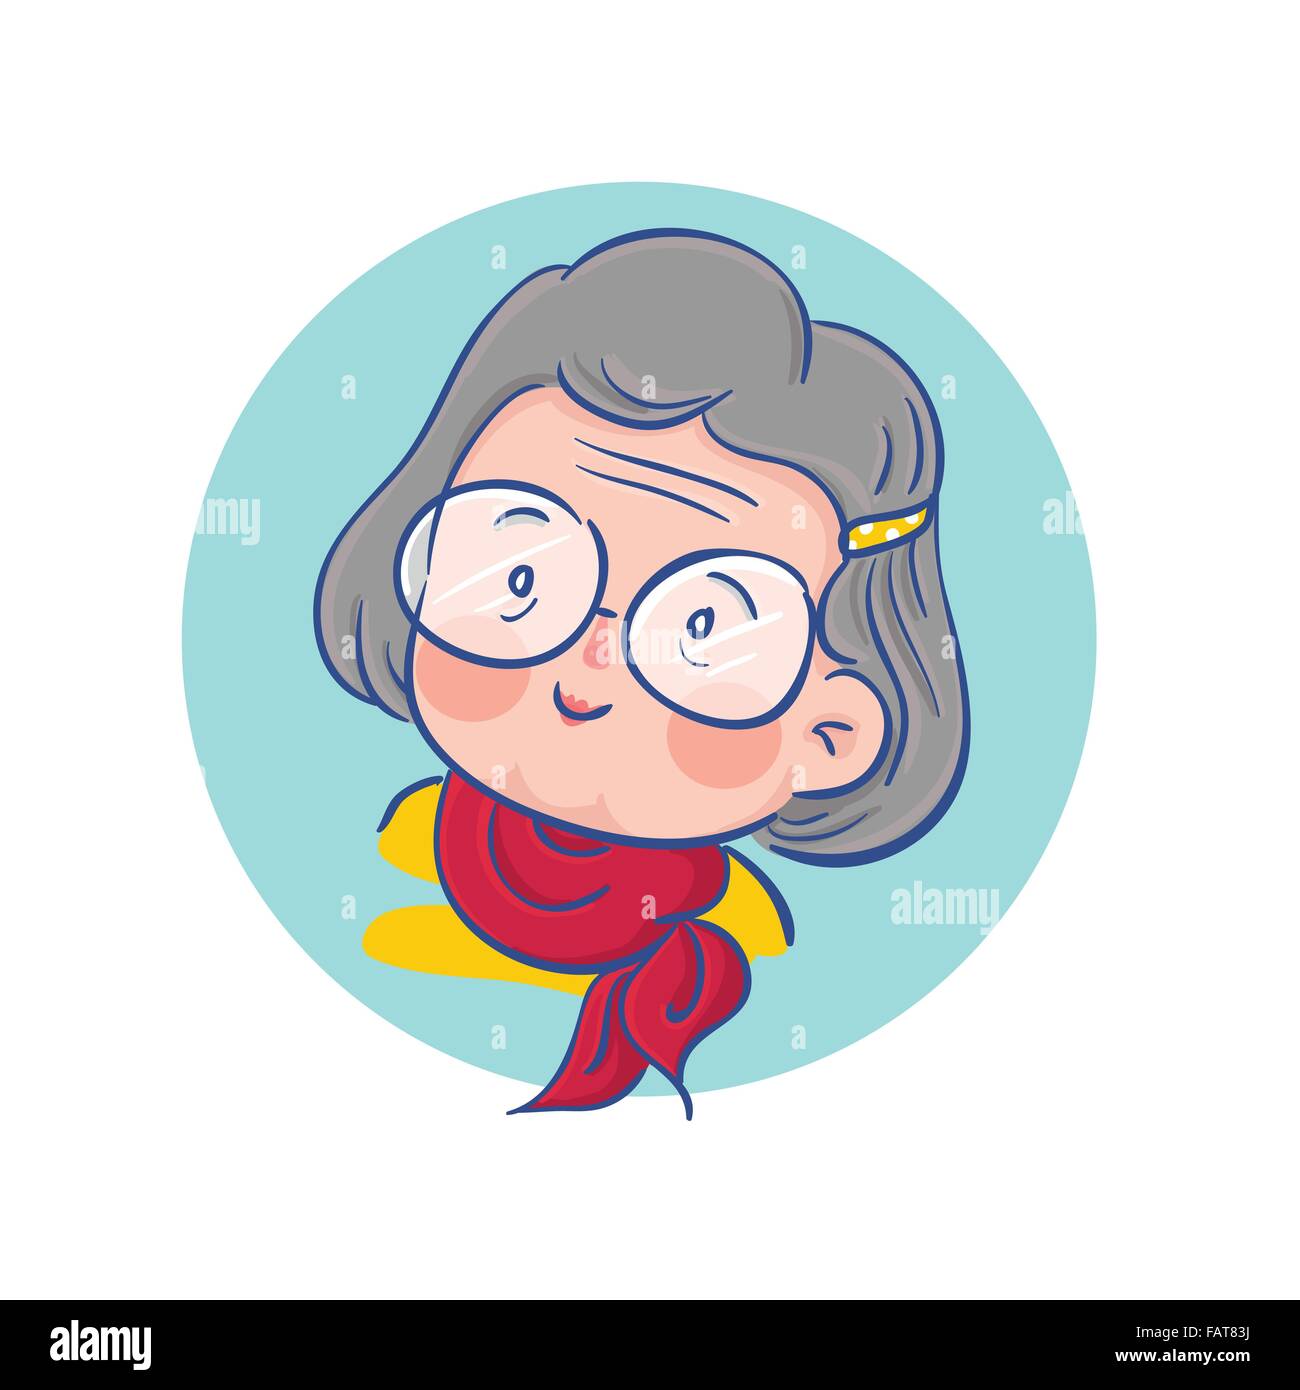 Vector Illustration of Old Woman Wear Eyeglasses, Cartoon Character Profile Picture Stock Vector